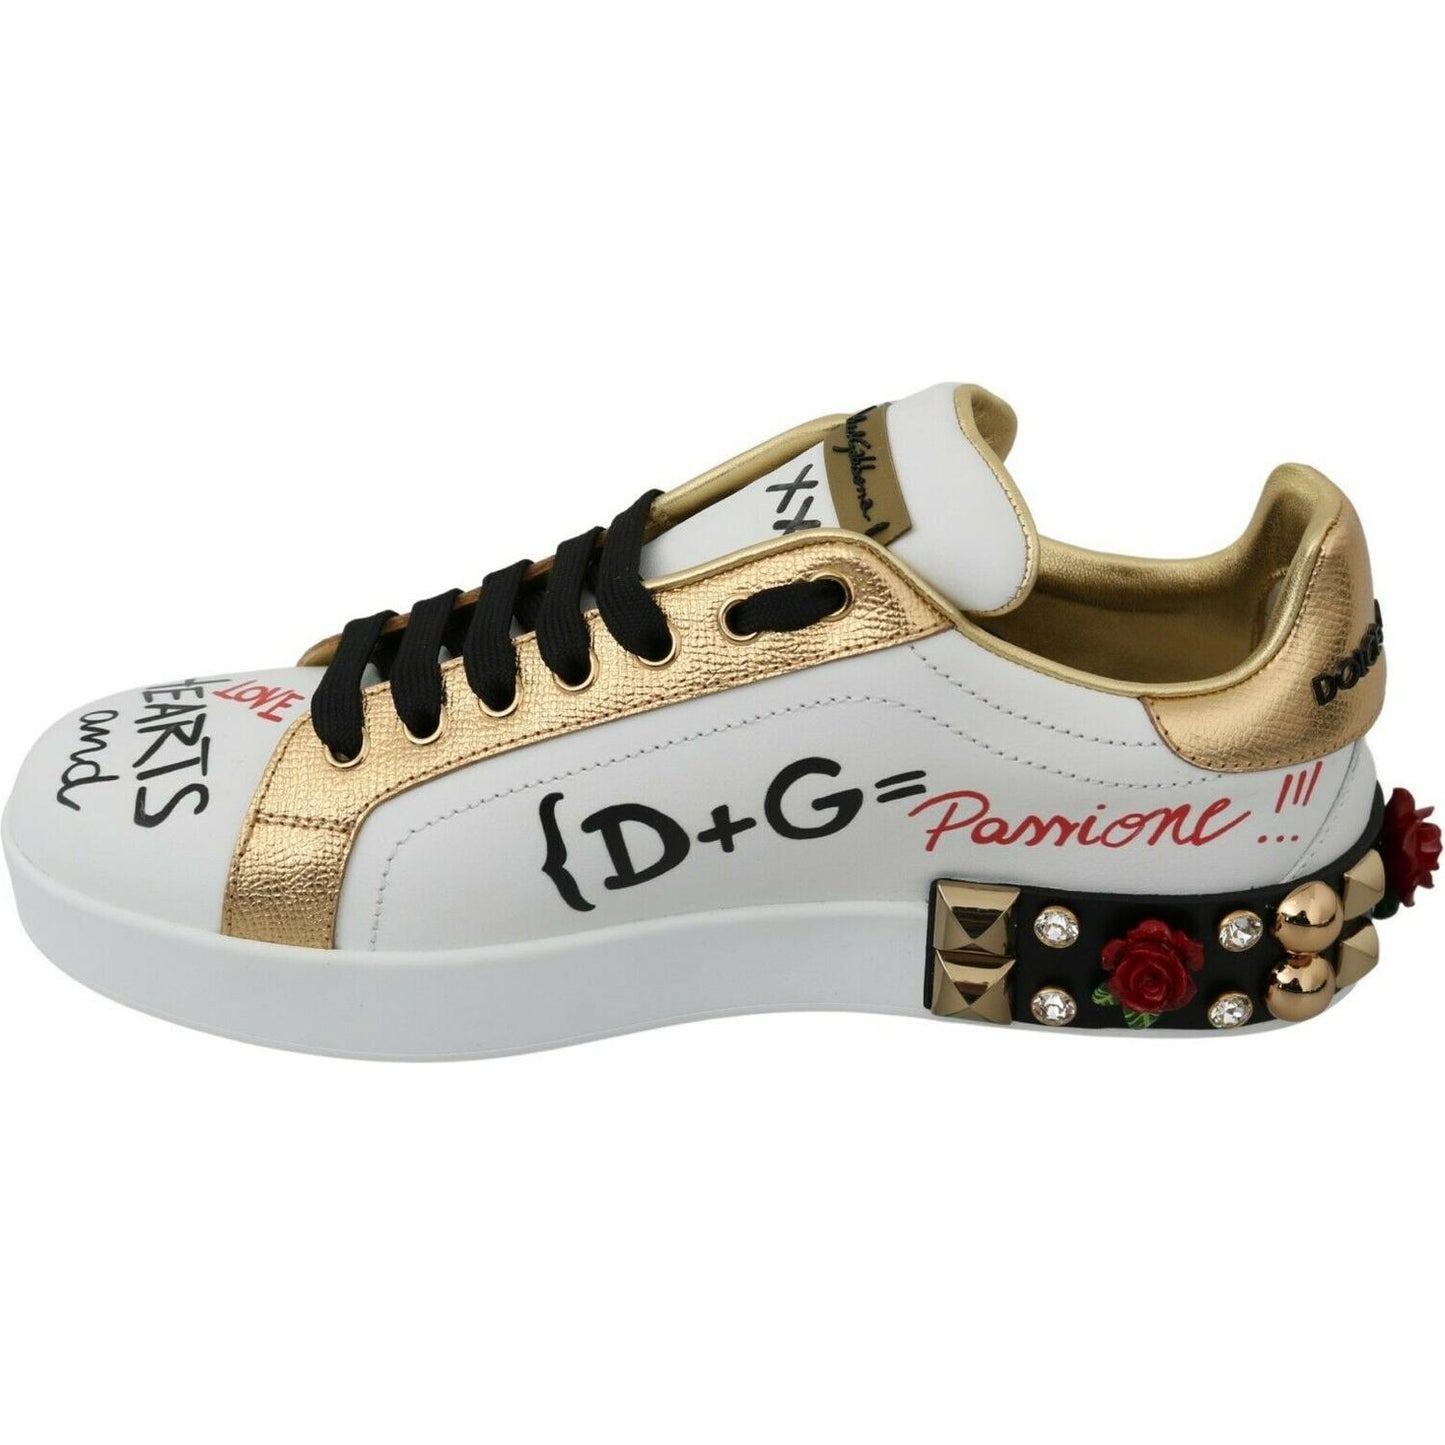 Dolce & Gabbana Elegant Sequined Floral Leather Sneakers white-roses-sequined-crystal-womens-sneakers-shoes